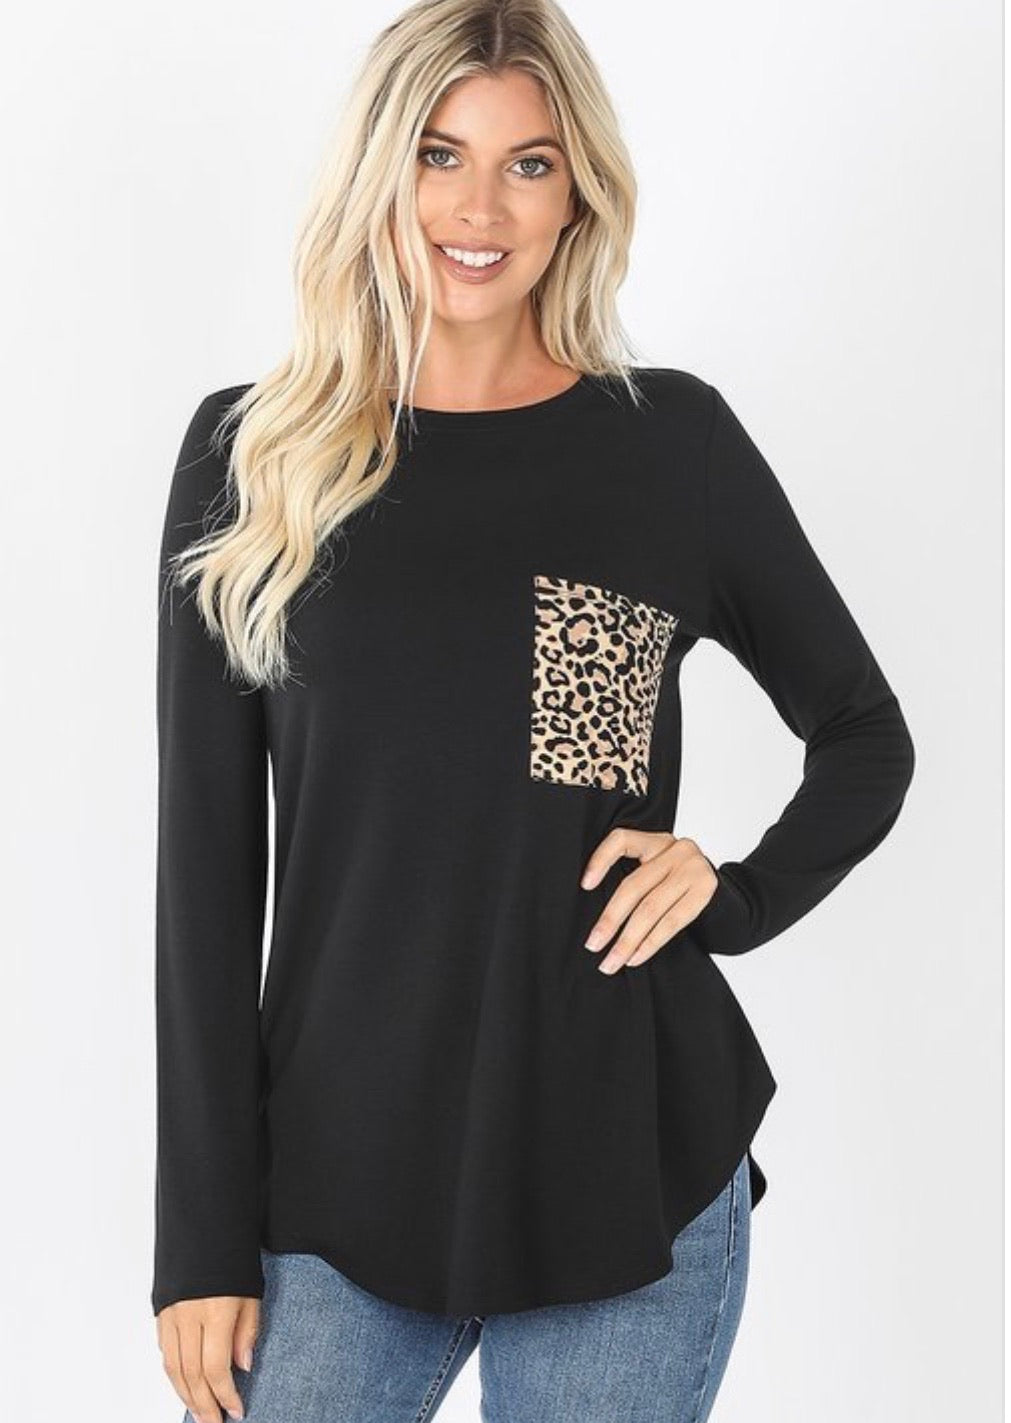 Dannie Basic Long Sleeve Tee - Corinne Boutique Family Owned and Operated USA